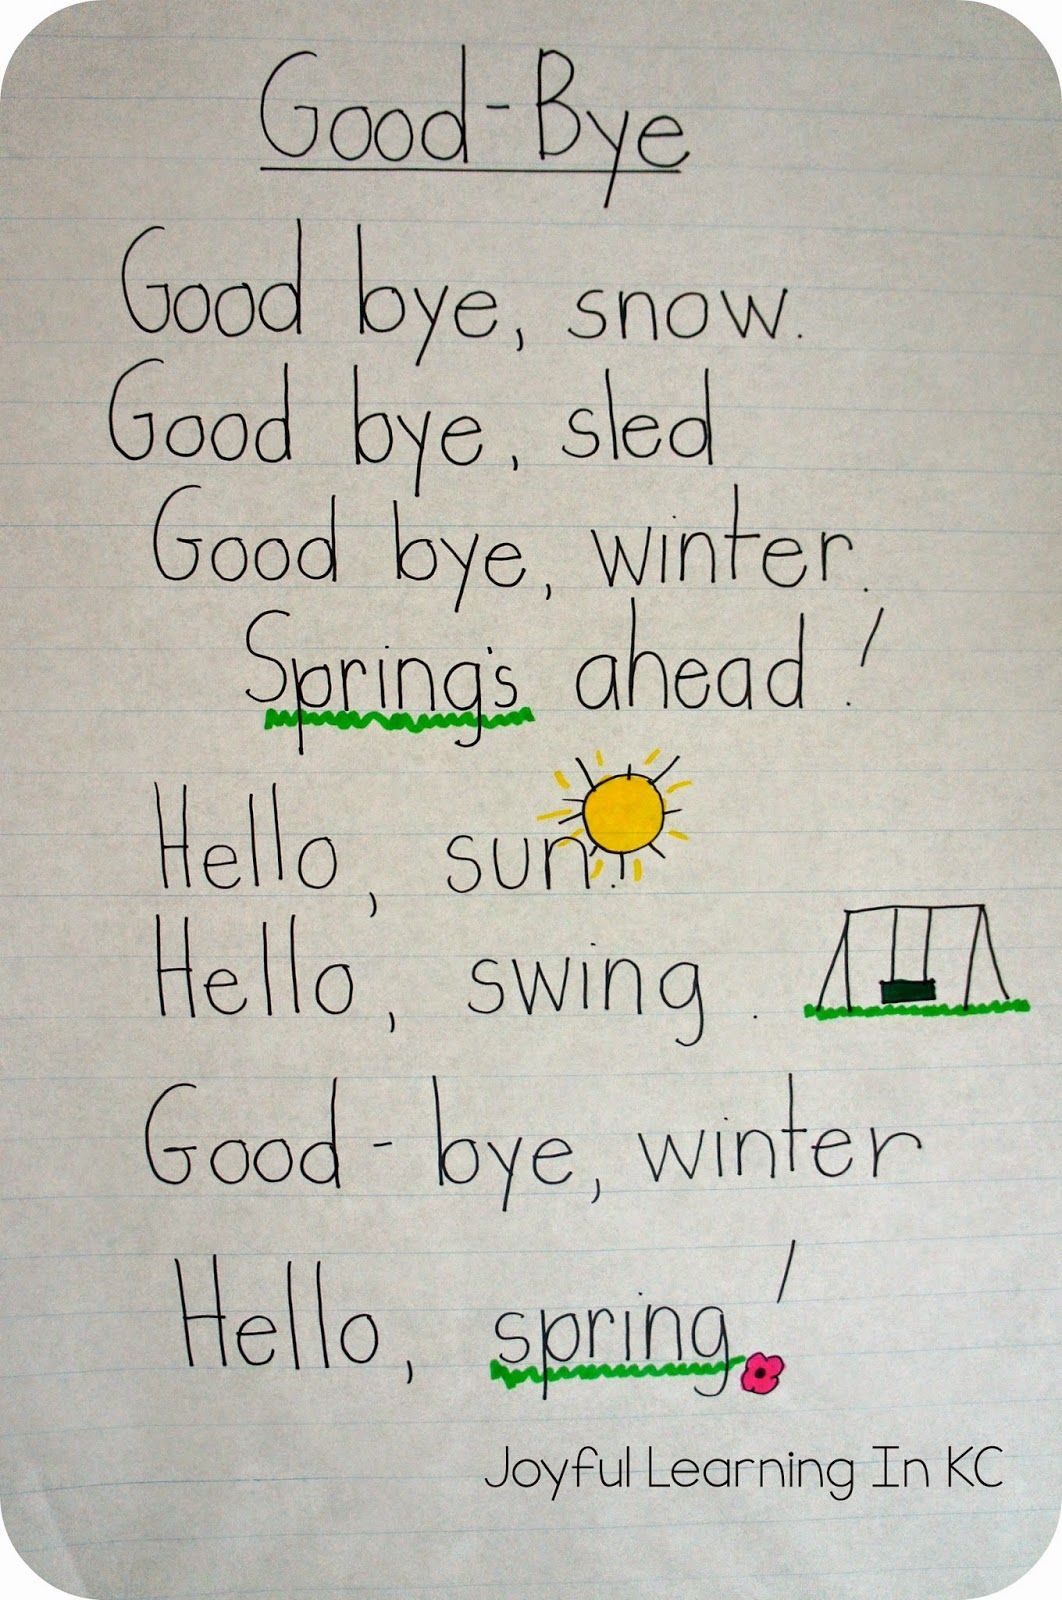 Joyful Learning In KC: Spring Poems for Shared Reading Time